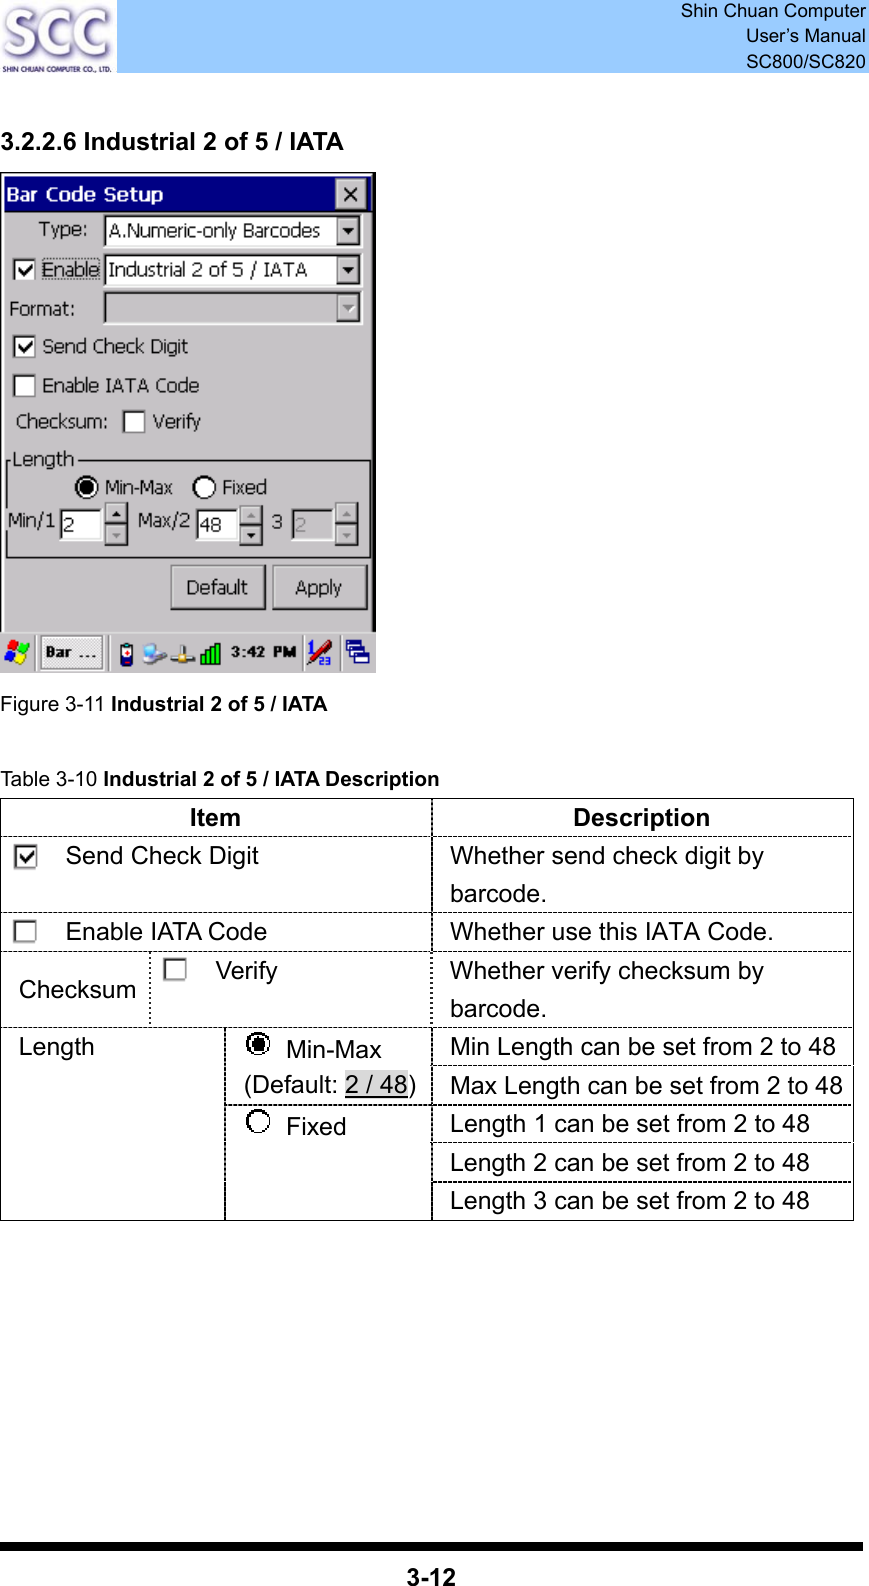  Shin Chuan Computer User’s Manual SC800/SC820  3-12  3.2.2.6 Industrial 2 of 5 / IATA  Figure 3-11 Industrial 2 of 5 / IATA  Table 3-10 Industrial 2 of 5 / IATA Description Item Description Send Check Digit  Whether send check digit by barcode. Enable IATA Code  Whether use this IATA Code. Checksum  Verify  Whether verify checksum by barcode. Min Length can be set from 2 to 48  Min-Max (Default: 2 / 48)Max Length can be set from 2 to 48Length 1 can be set from 2 to 48 Length 2 can be set from 2 to 48 Length  Fixed Length 3 can be set from 2 to 48        